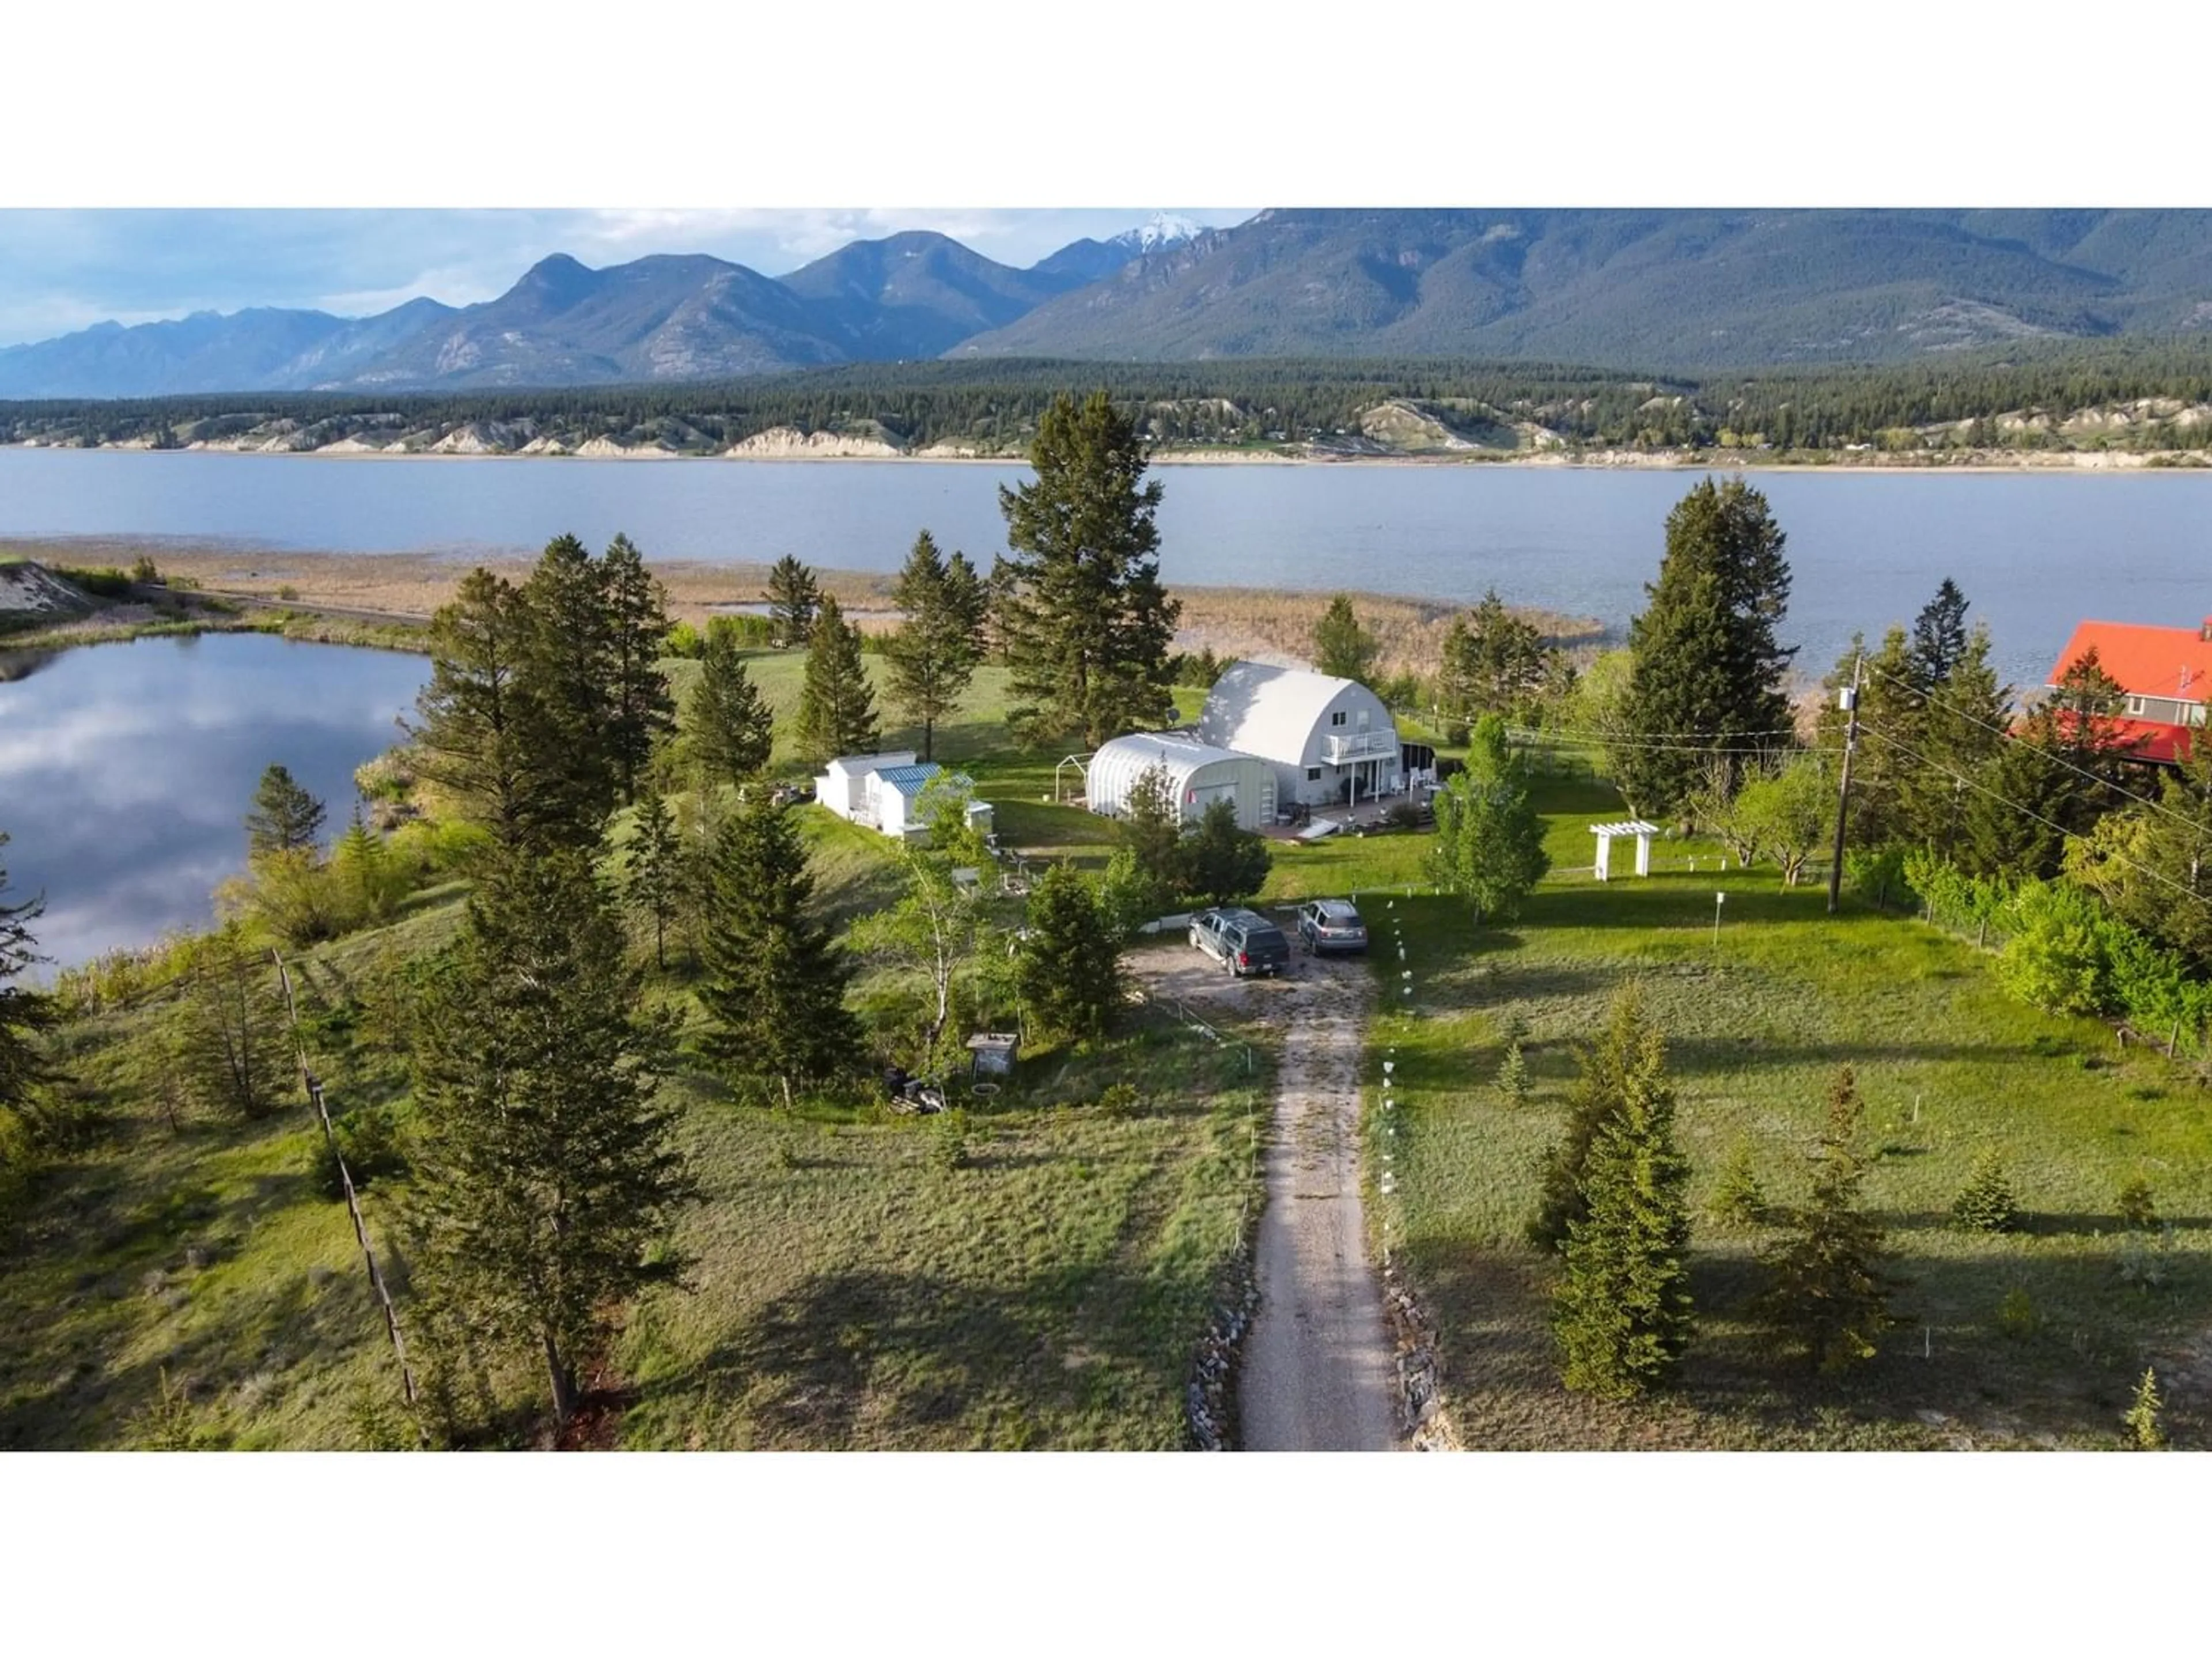 Lakeview for 4556 RUSHMERE ROAD, Invermere British Columbia V0A1K4